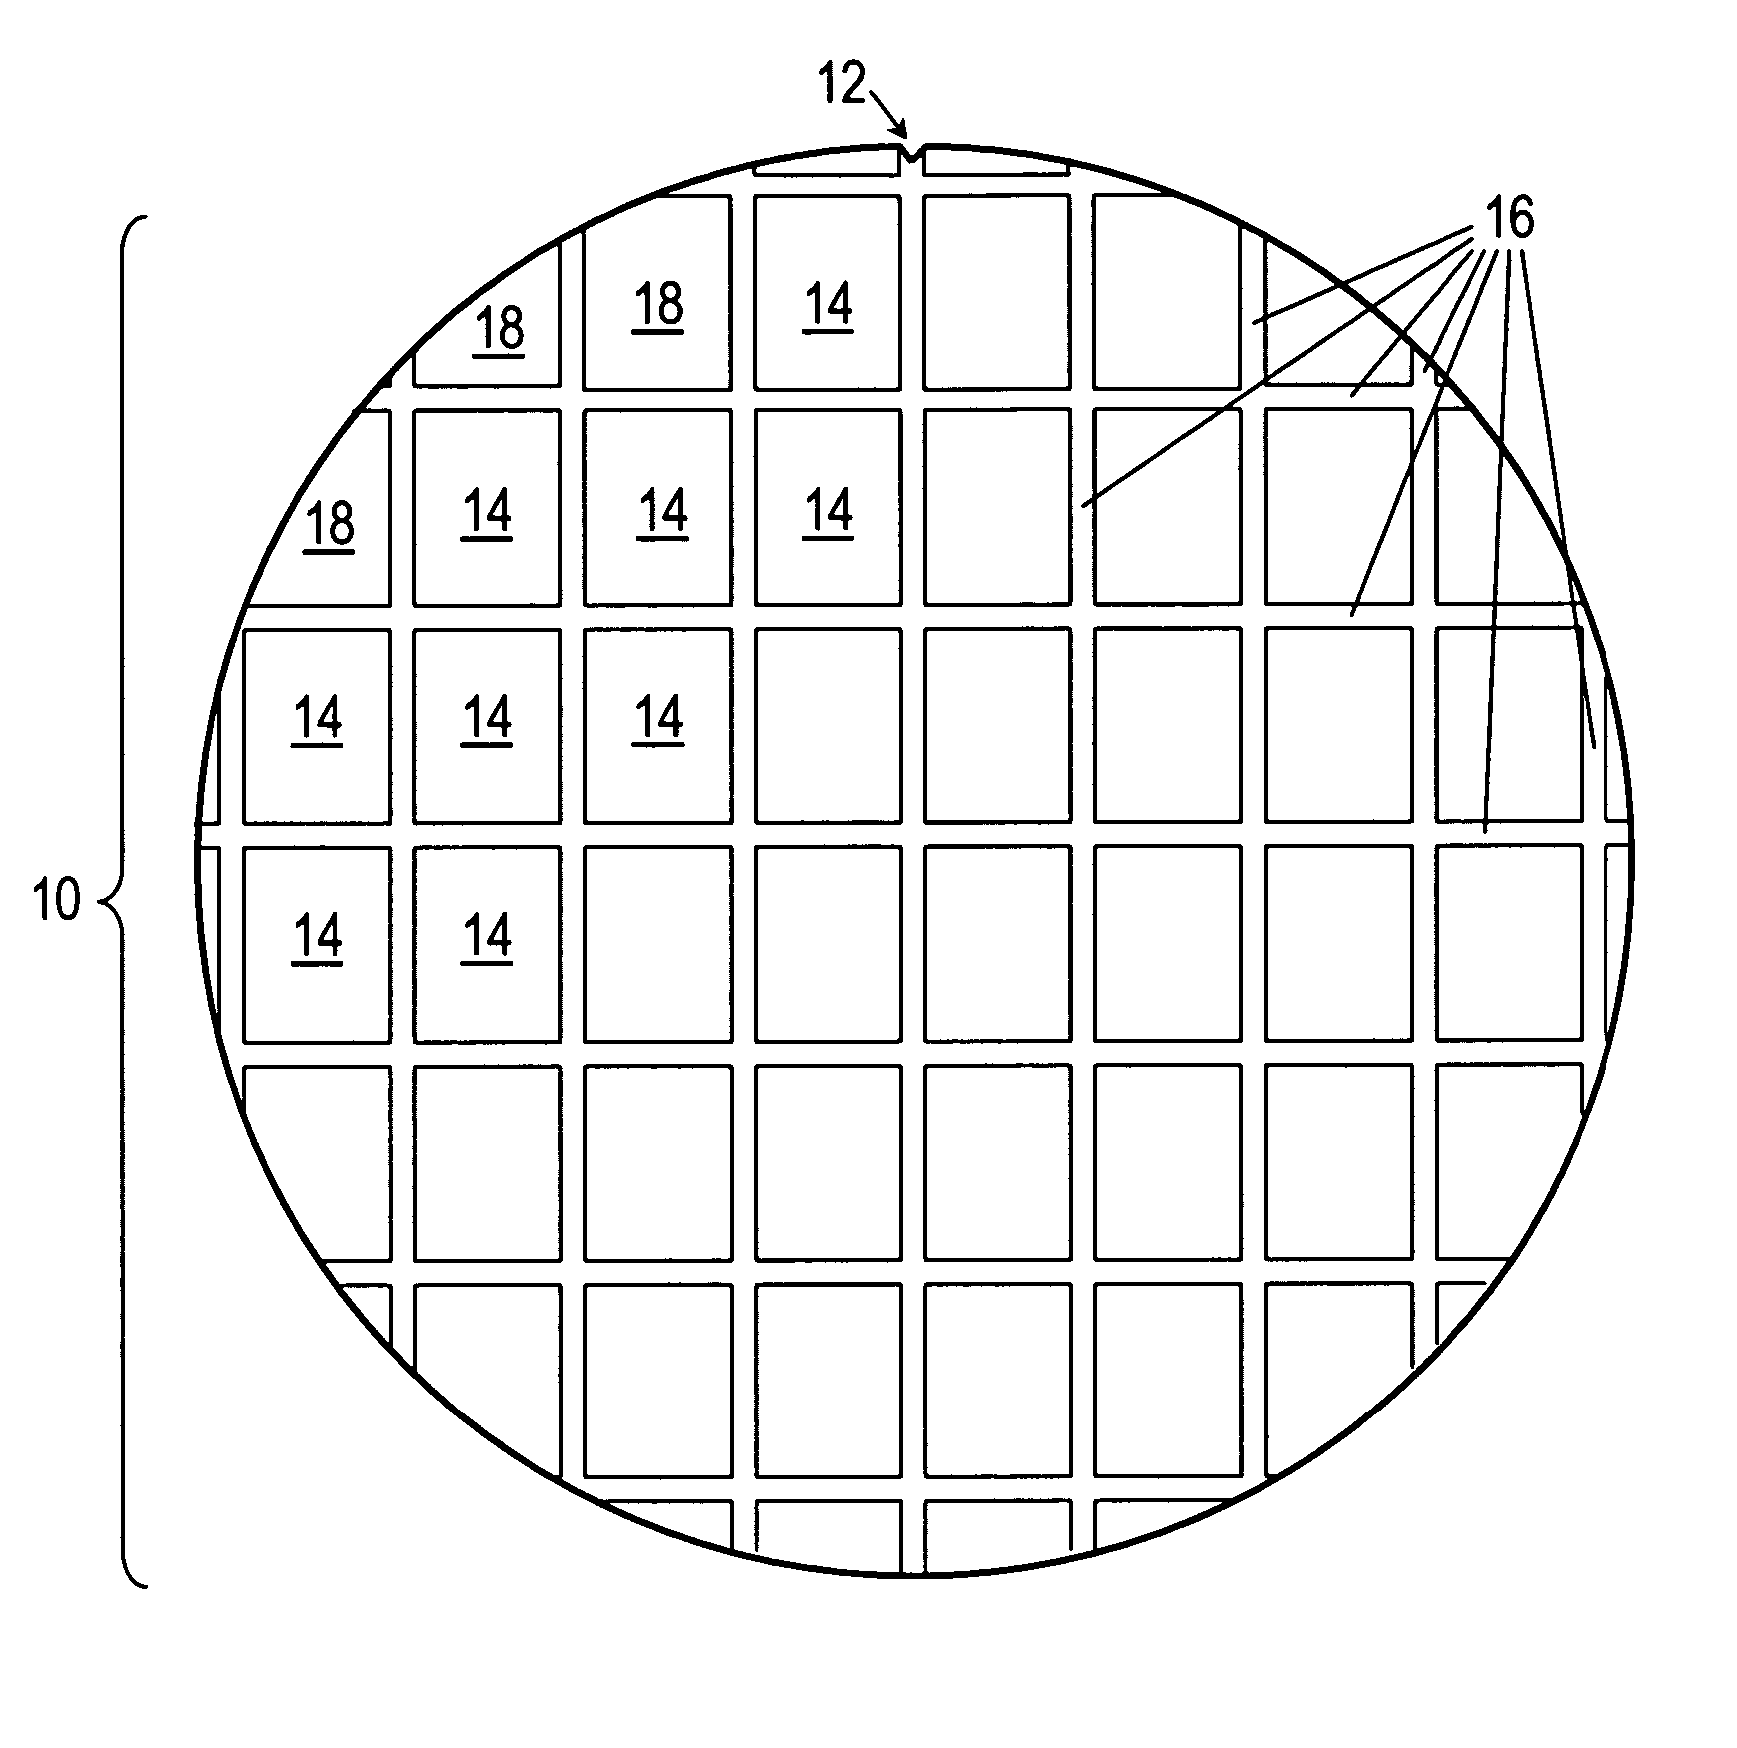 Method for reducing stress concentrations on a semiconductor wafer by surface laser treatment